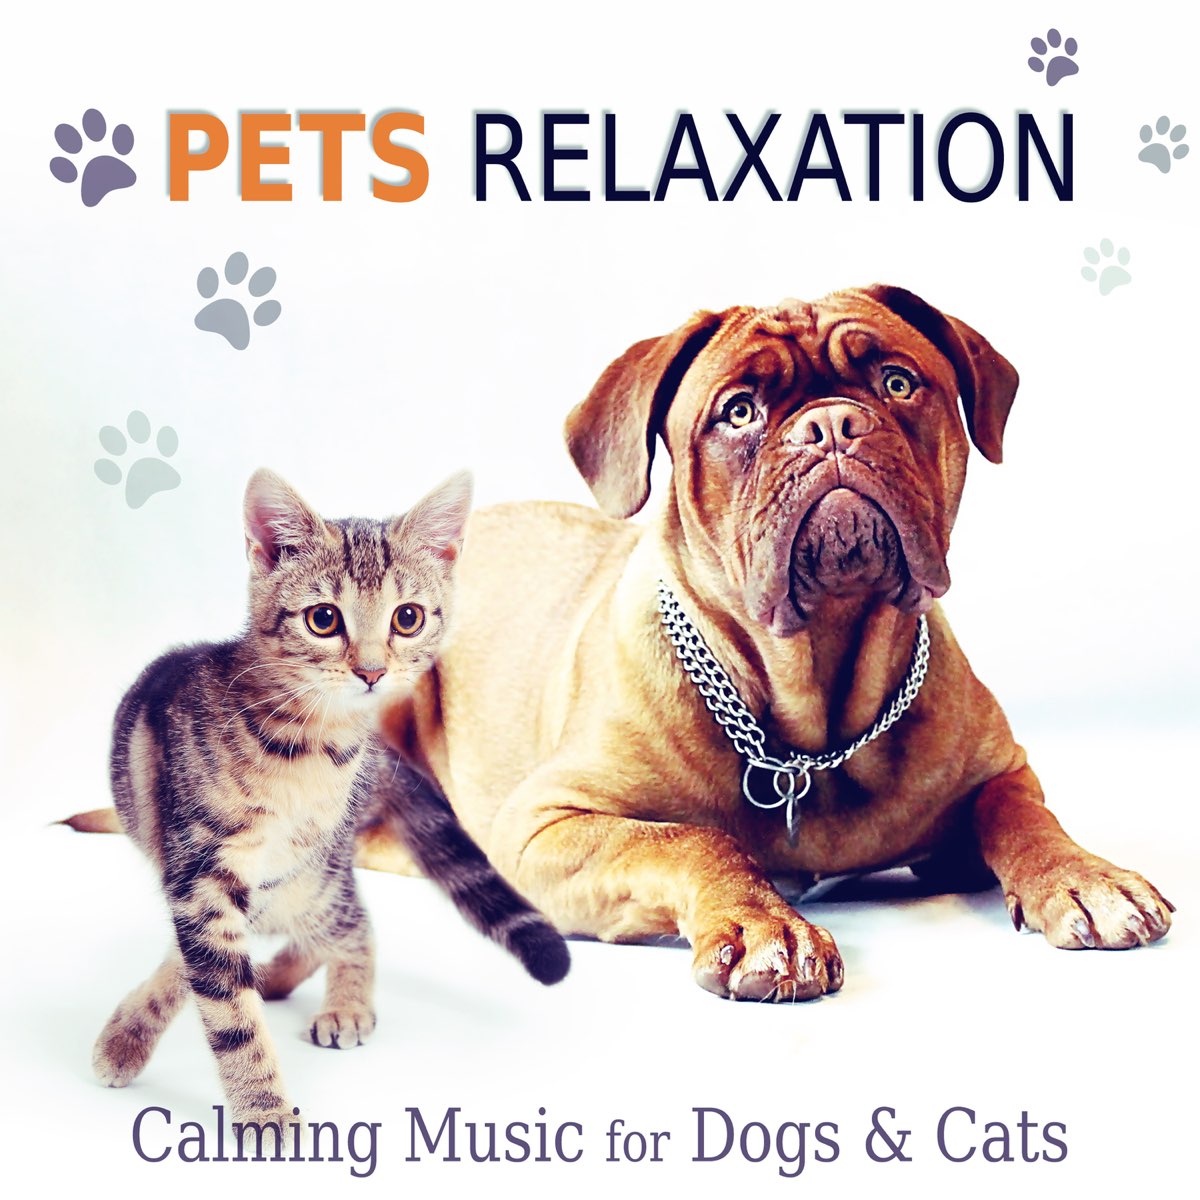 Pet Academy. Songs for Pets. Pets and Music Music for Cats and friends - Vol. 2. About Pets with Song. Pets музыка